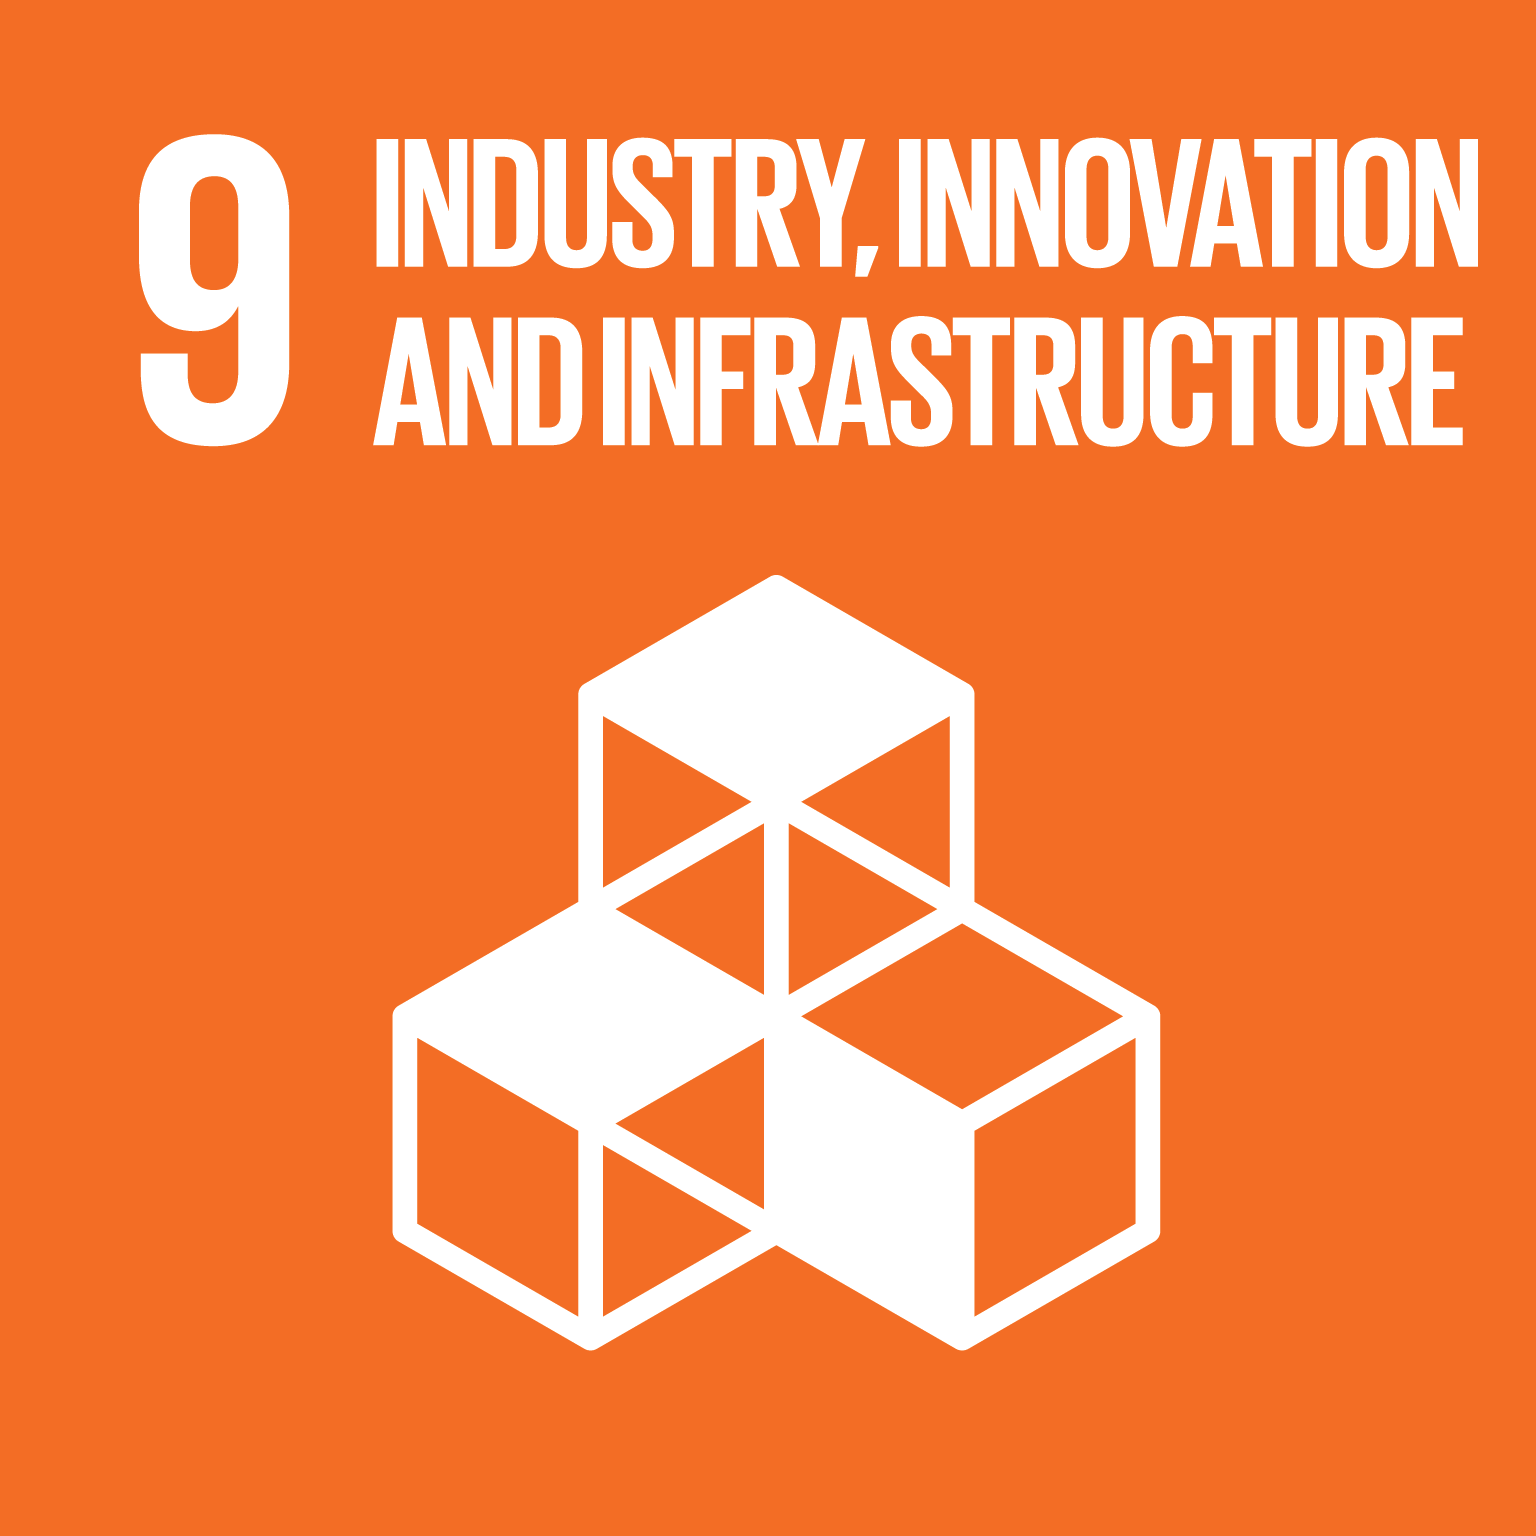 SDG Goal 9 - Industry, Innovation and Infrastructure